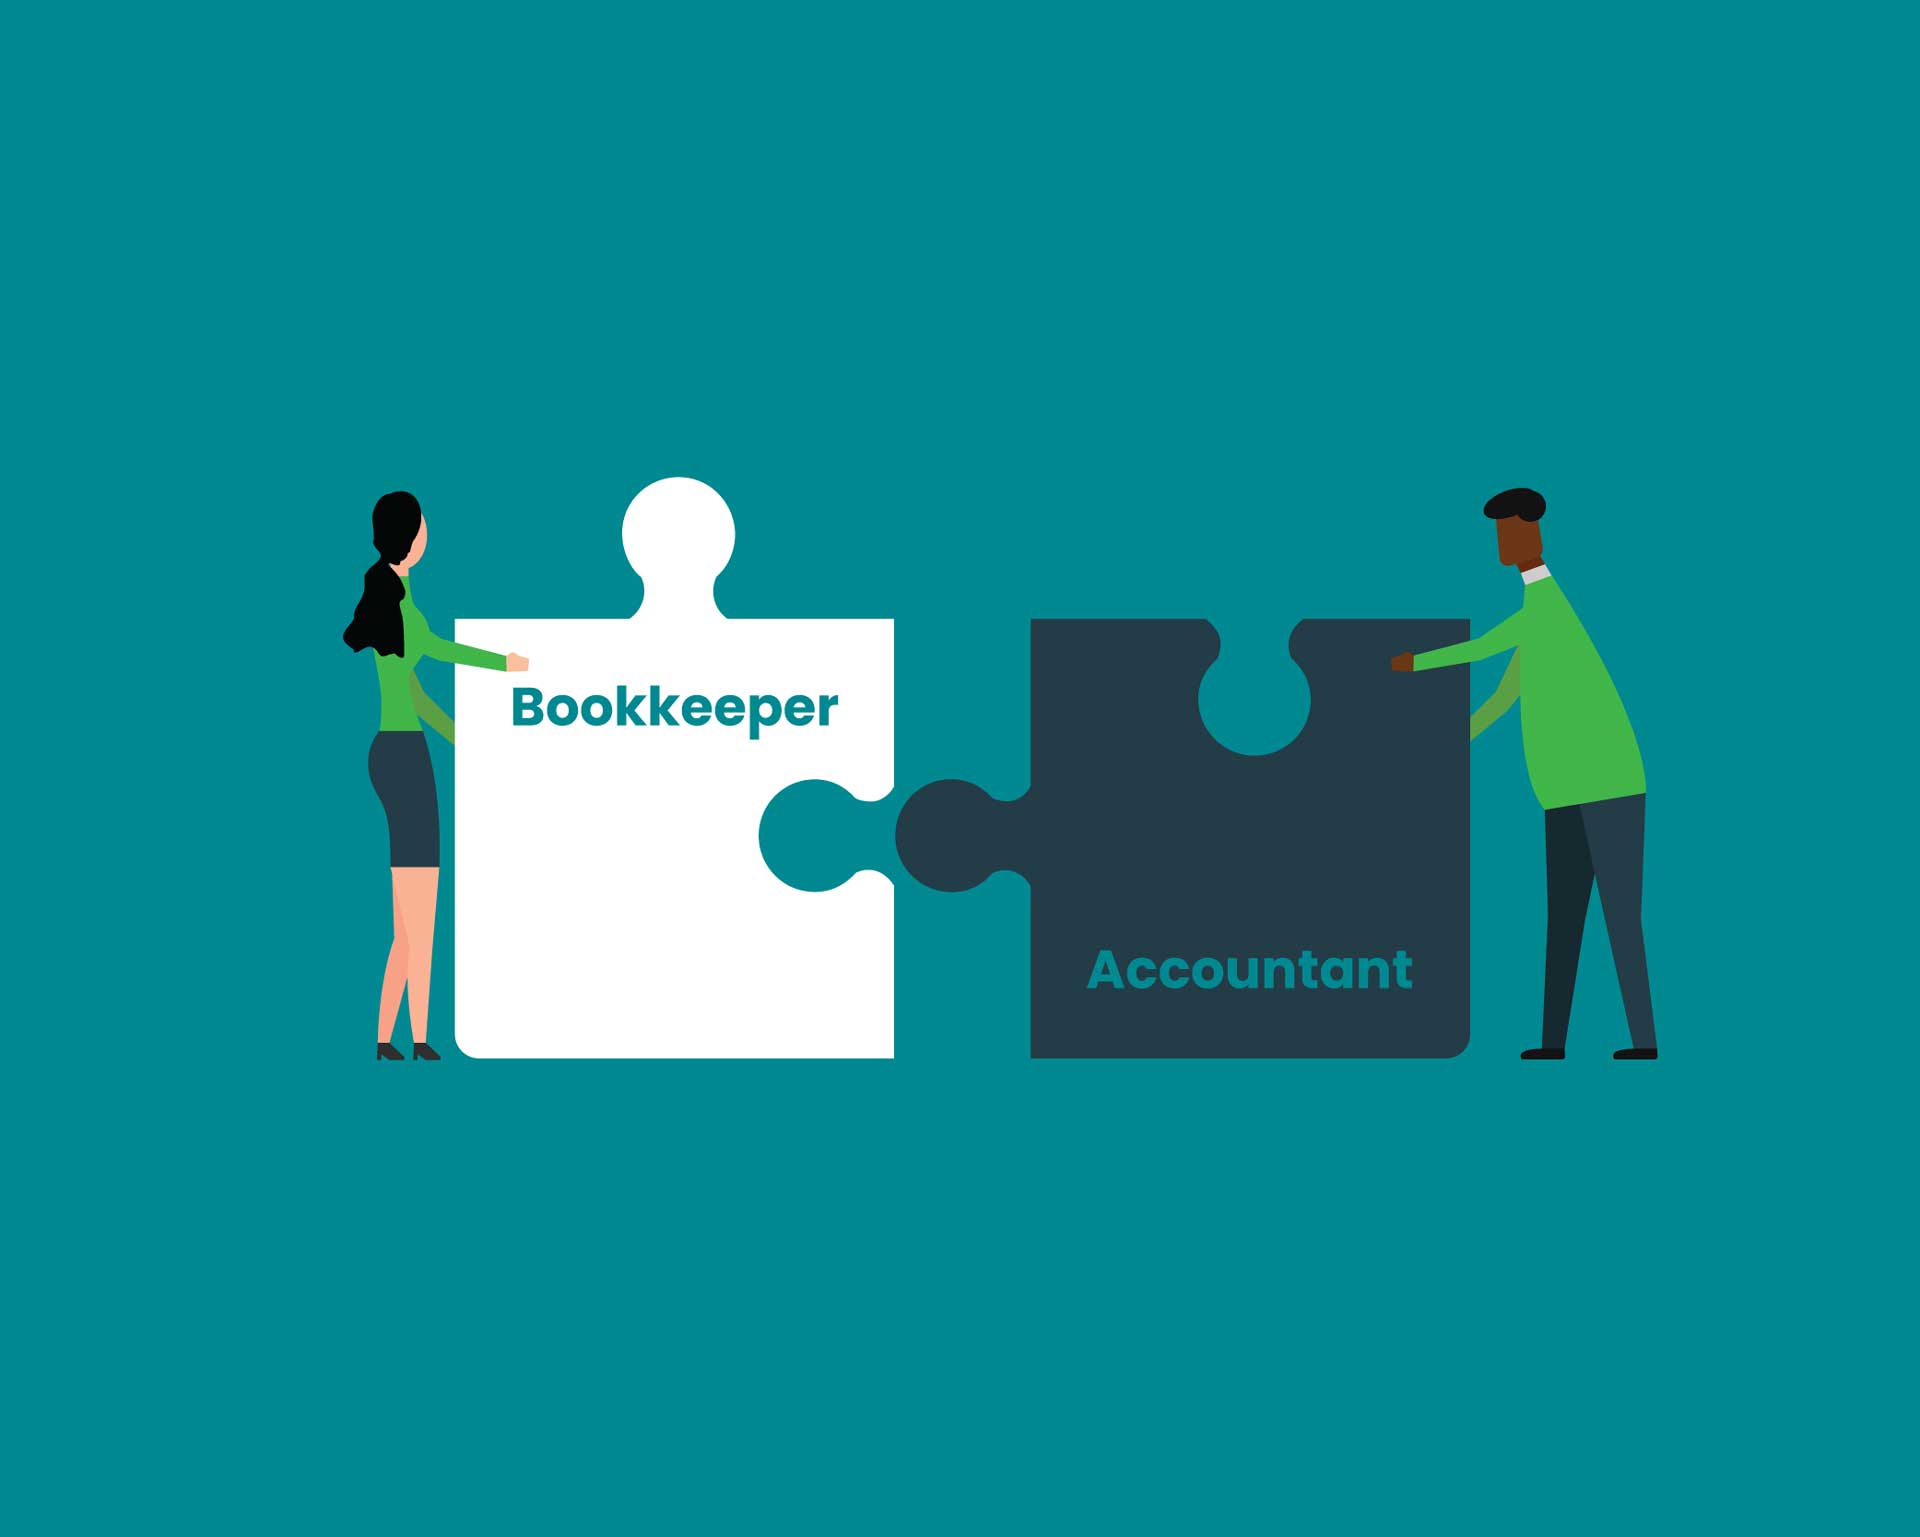 Both accountants and bookkeepers play a key role in keeping your business financially healthy.